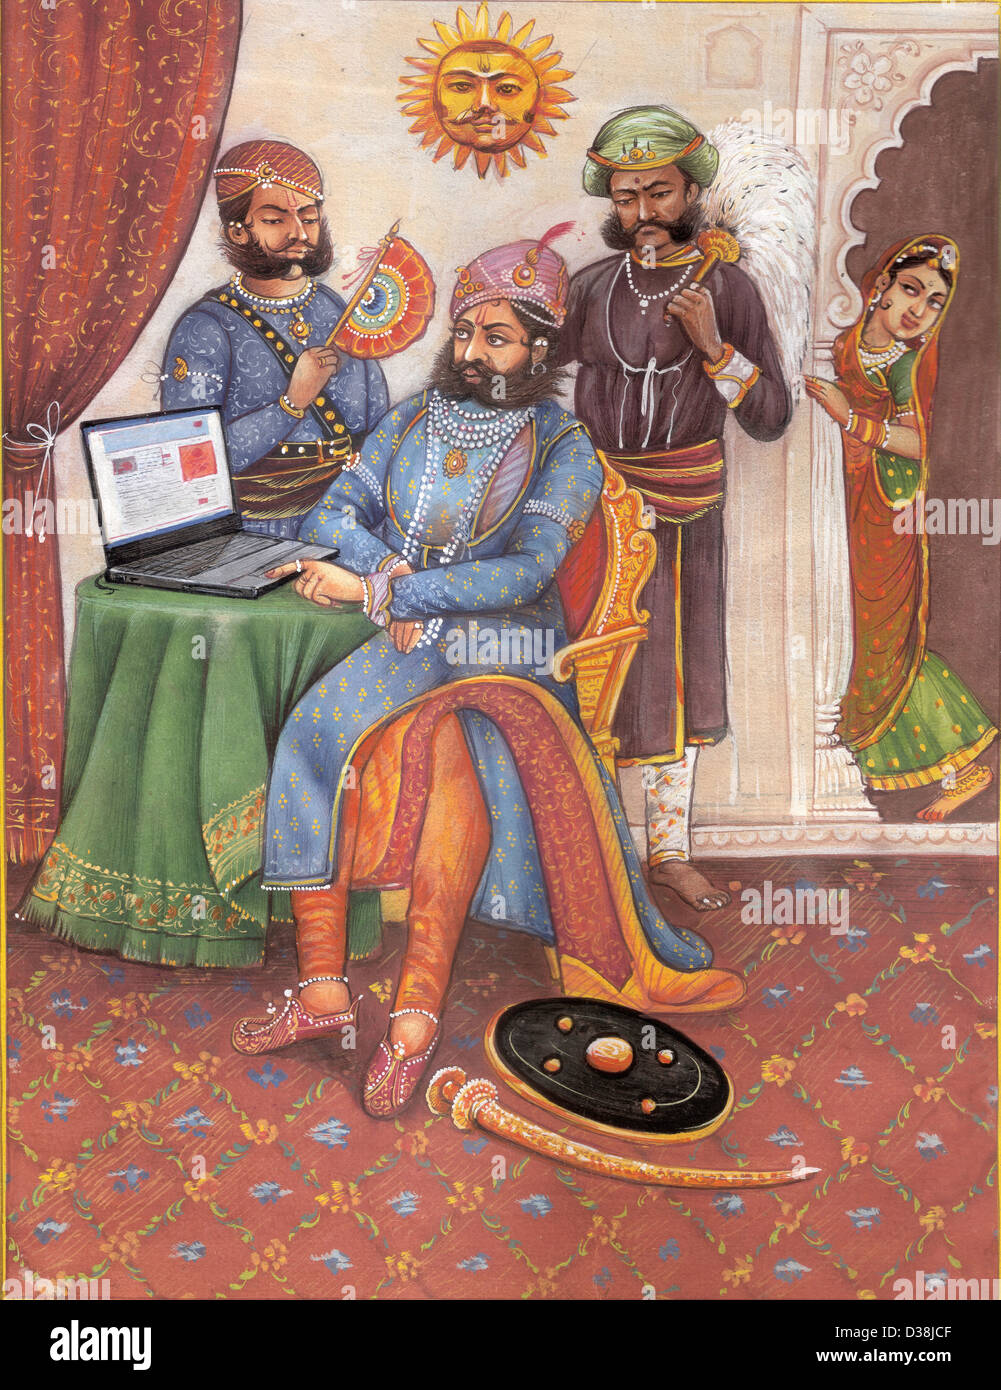 Painting of a Rajasthani king using a laptop, Rajasthan, India Stock Photo